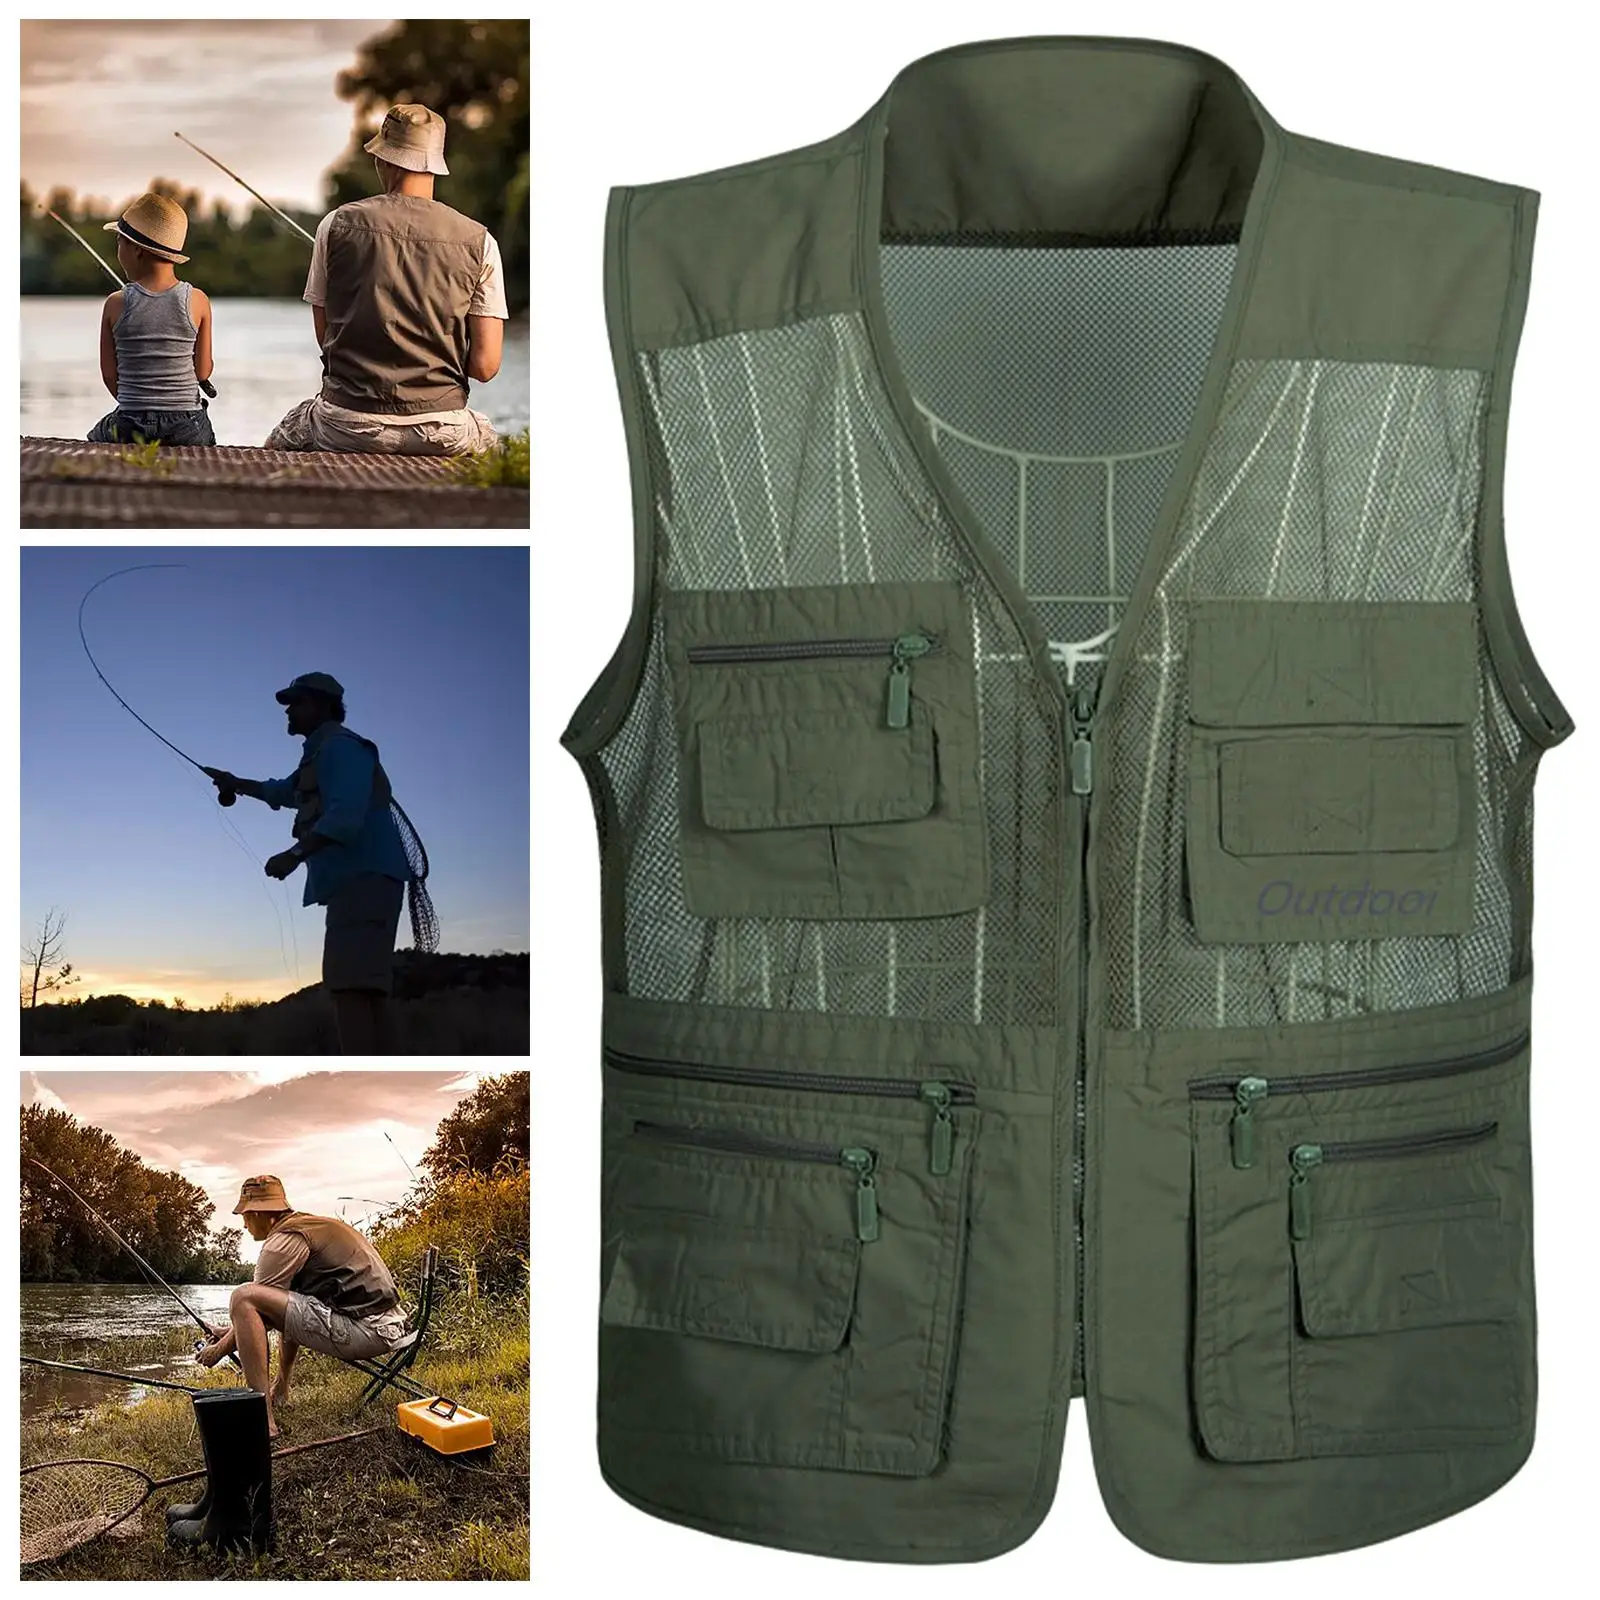 Portable Fishing Mesh Vest Comfortable Photography with Multi Pockets Lightweight Sleeveless Jacket for Camping Photogra Hunting